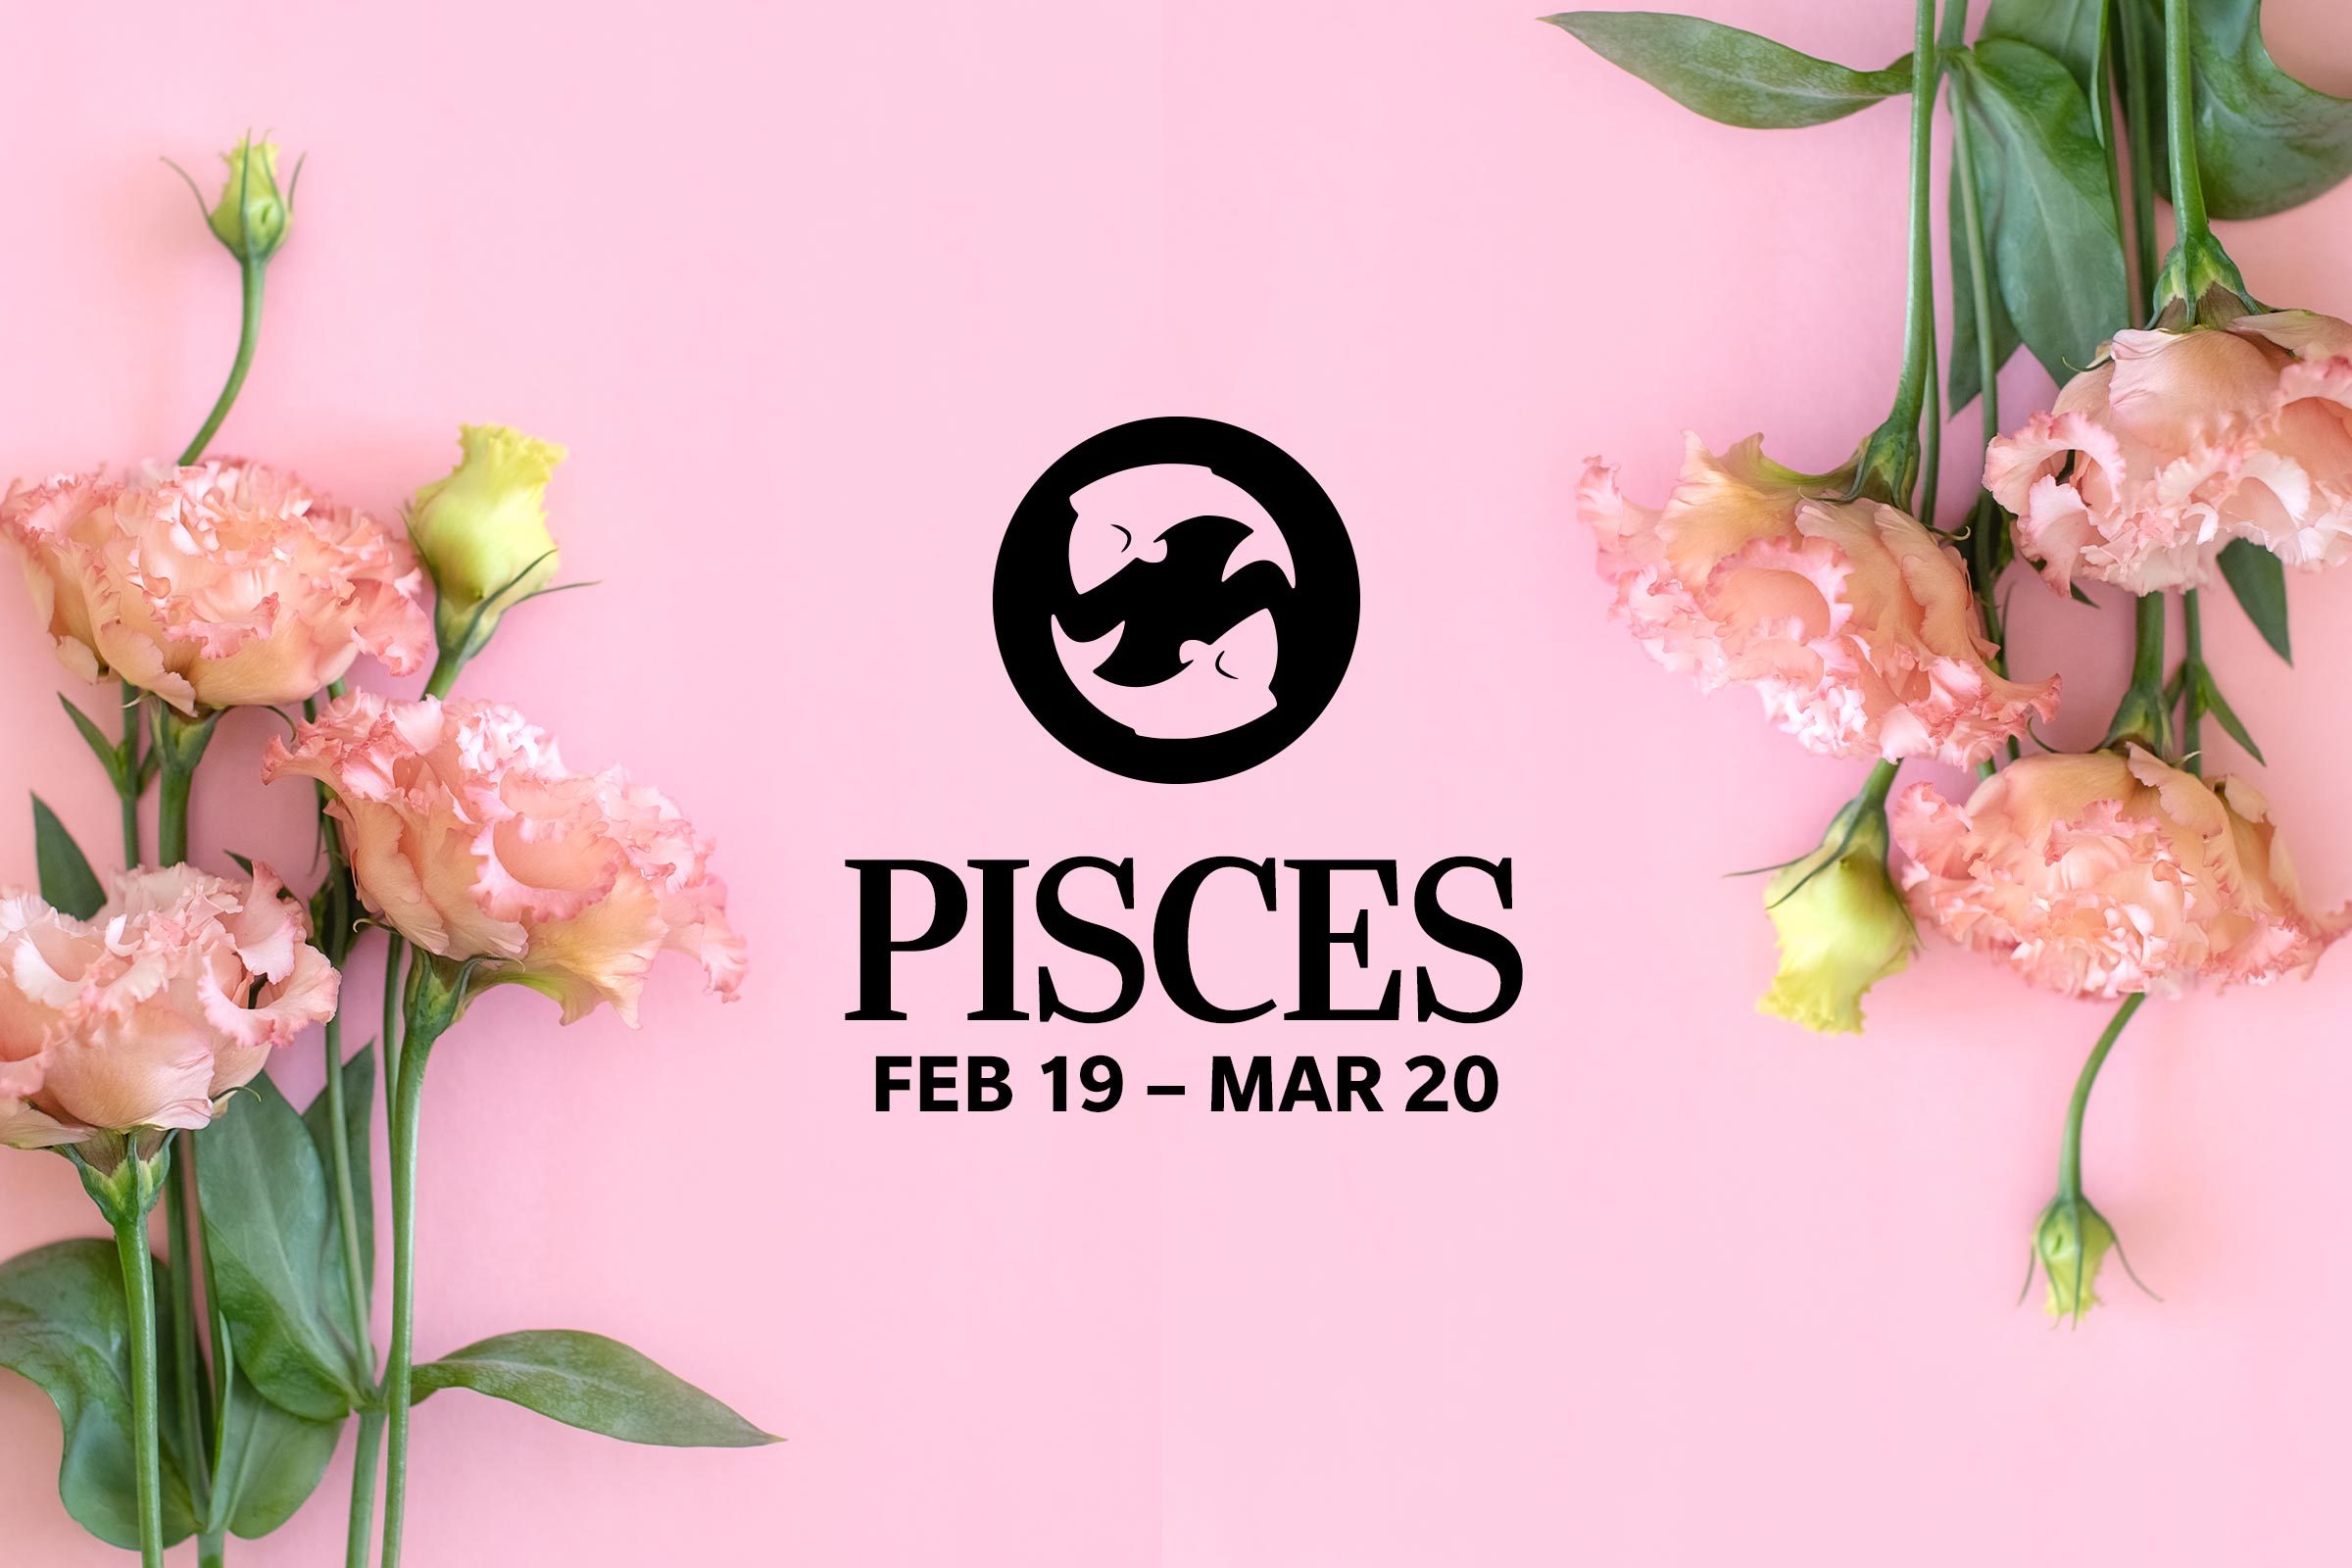 Pisces (February 19-March 20)